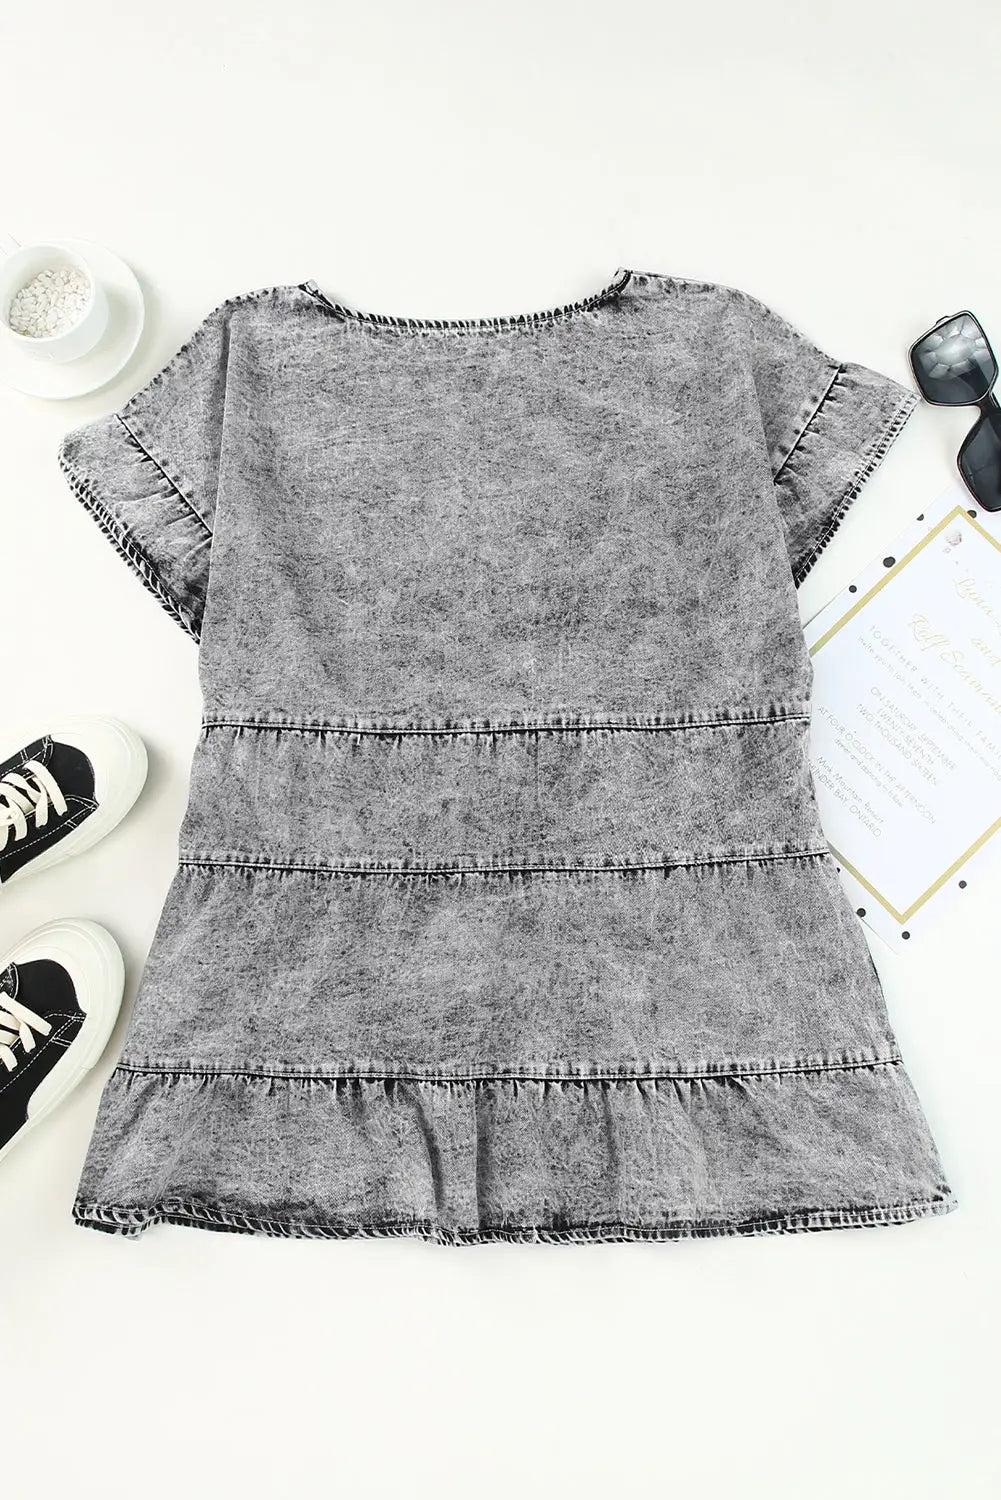 Gray flutter sleeves tiered denim top - t-shirts